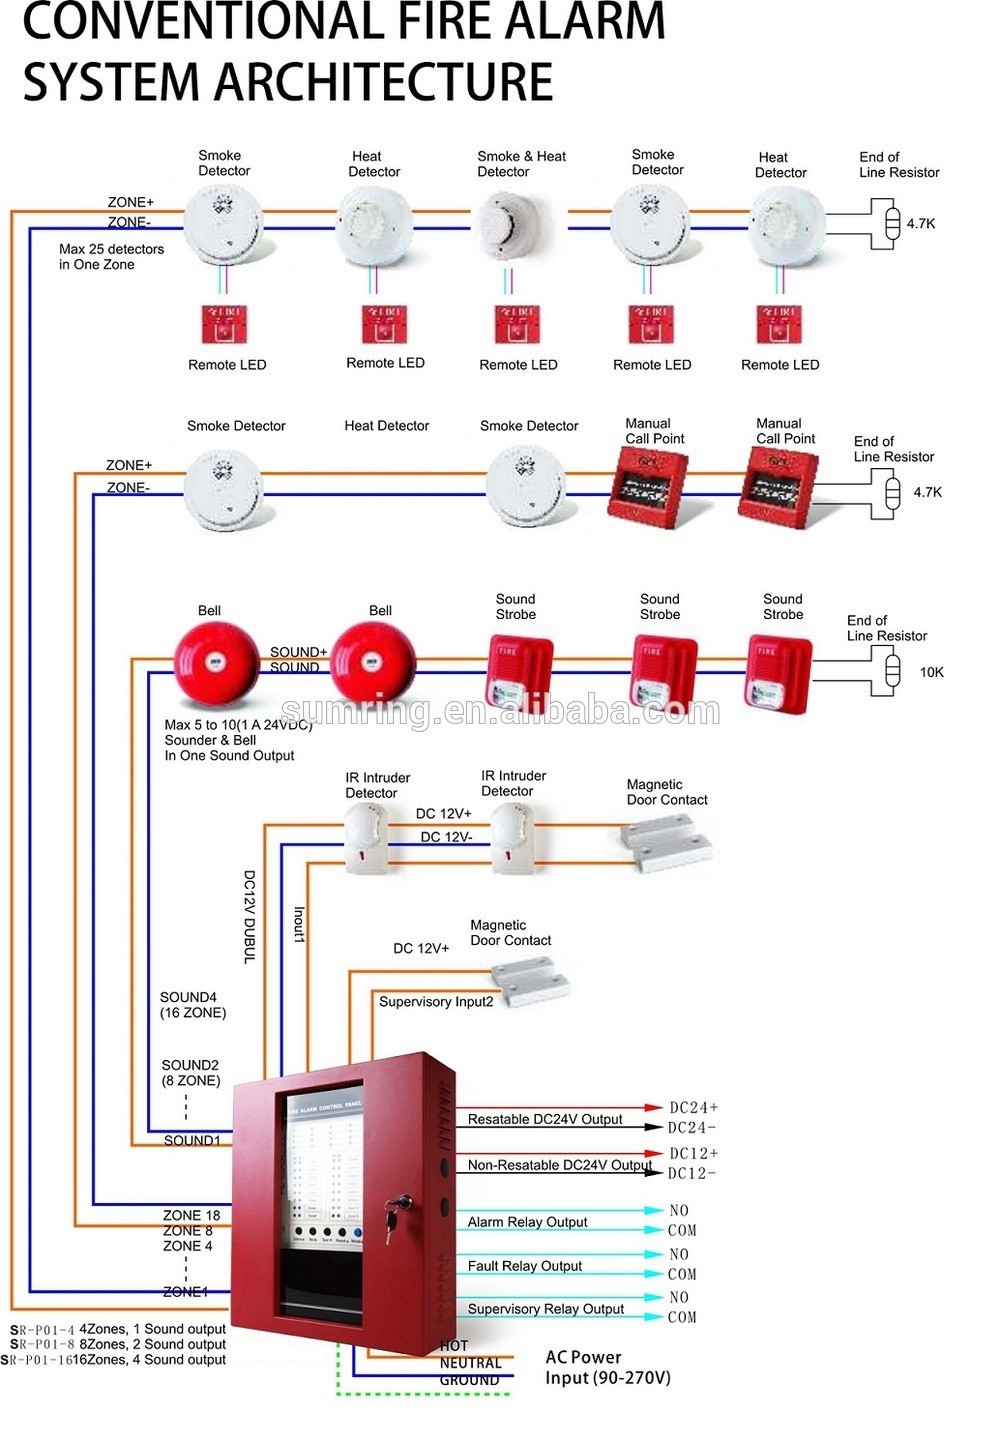 Fire Alarm Pull Station Wiring Diagram wiring diagram of manual call point save addressable fire